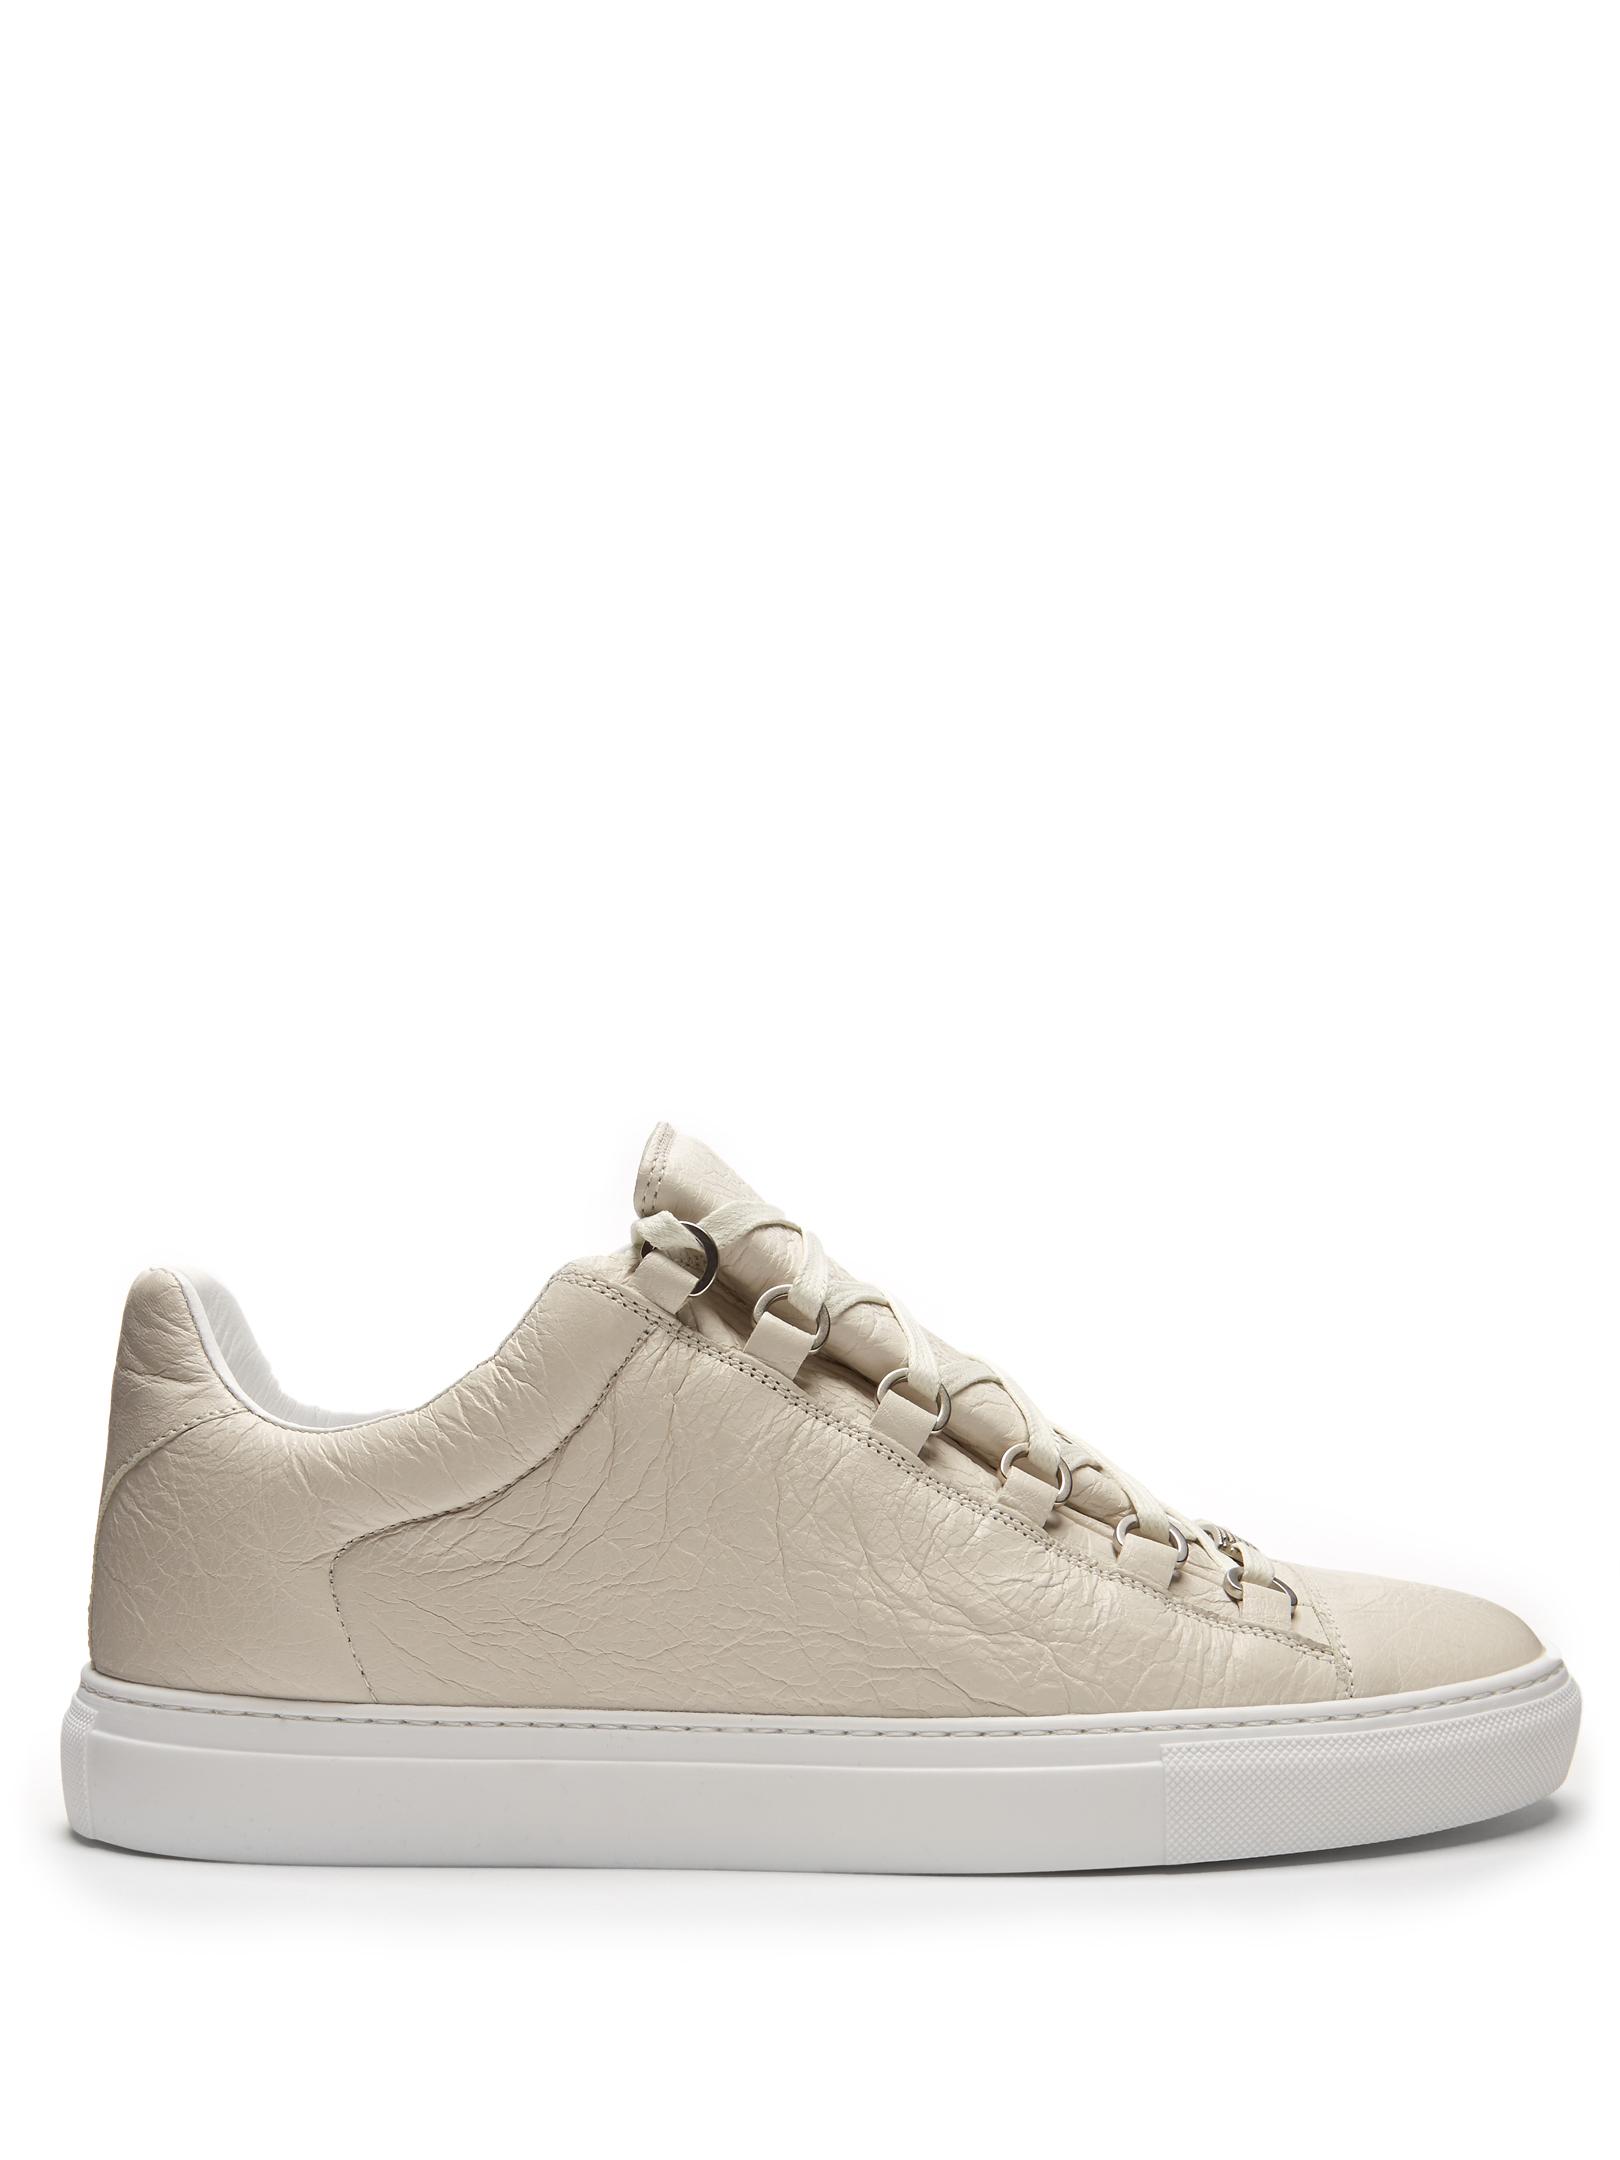 Learner saltet kultur Balenciaga Arena Low-top Leather Trainers in White for Men - Lyst